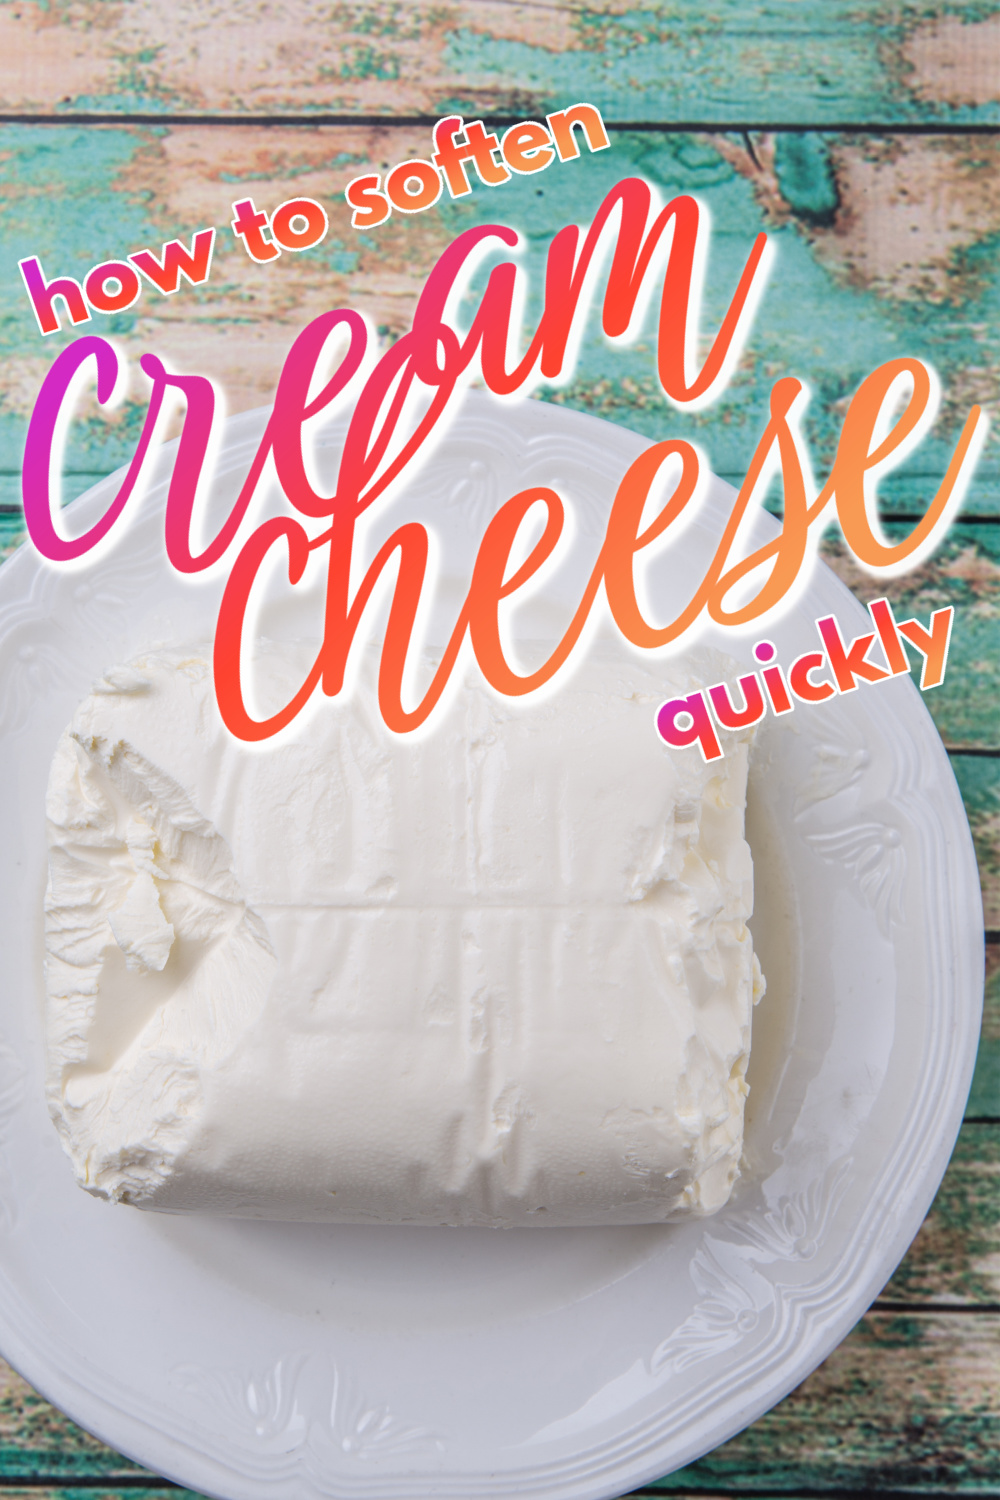 How to soften cream cheese quickly.